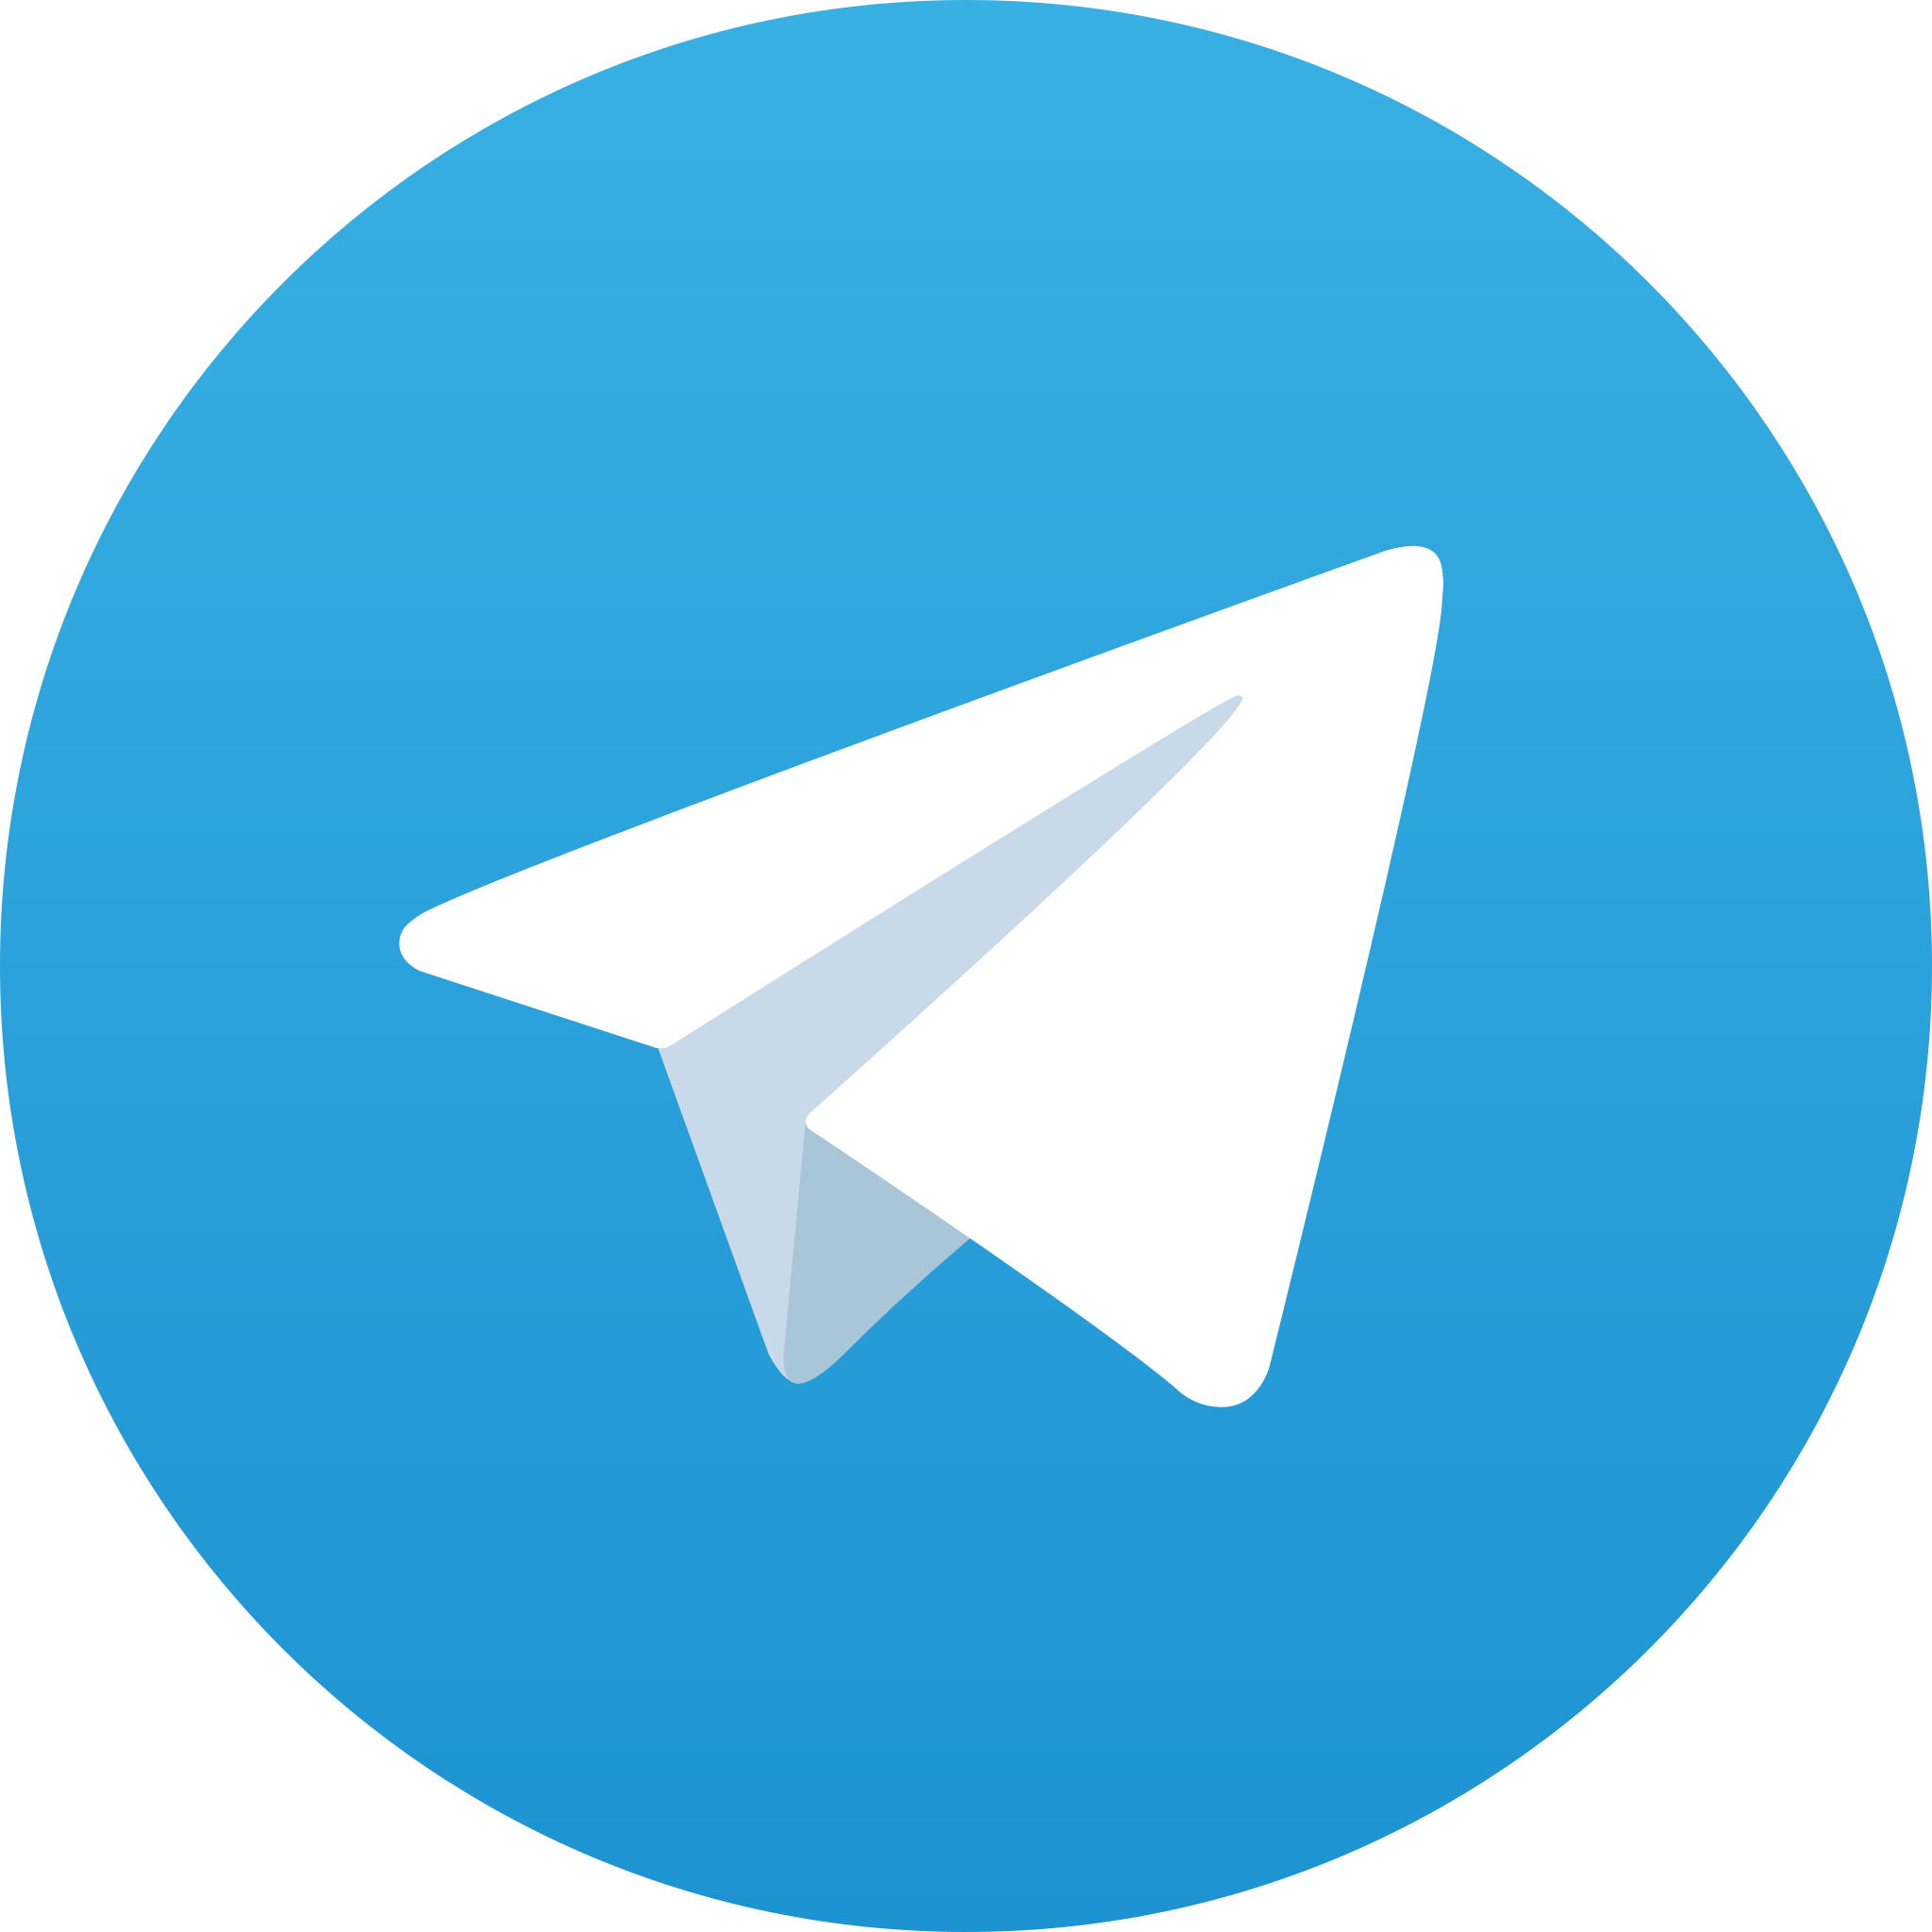 Join our Telegram Group!